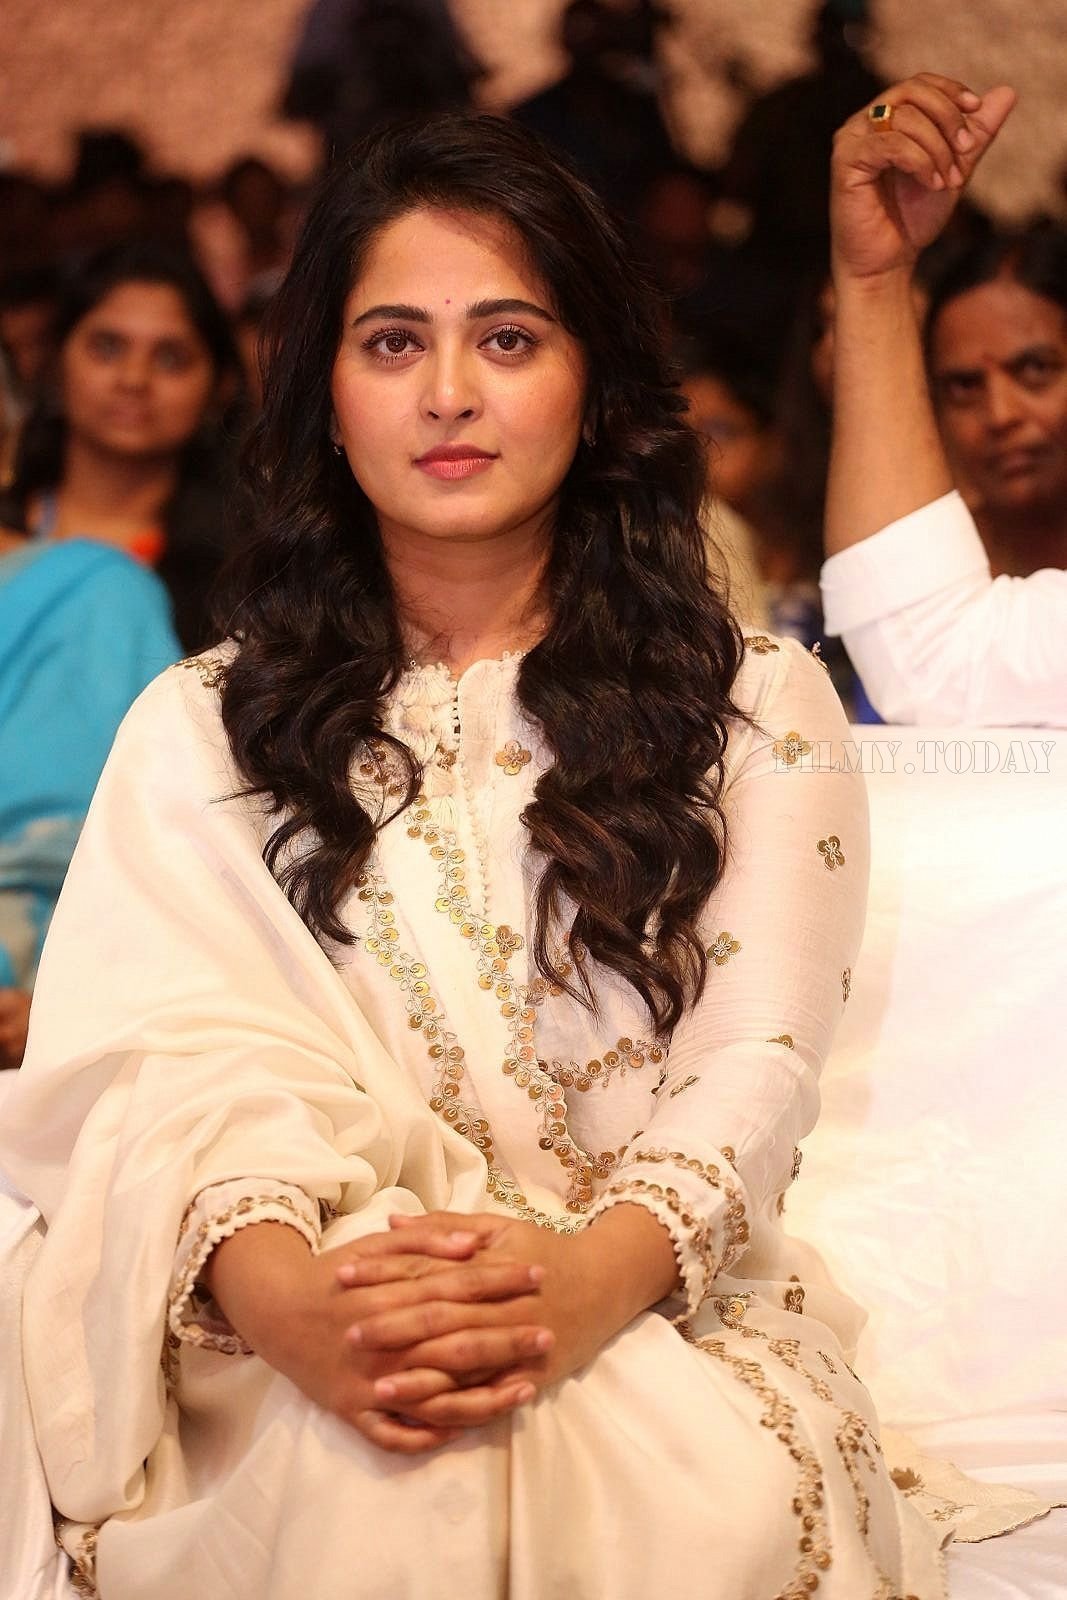 Anushka Shetty - Bhaagamathie Pre Release Event Photos | Picture 1560358